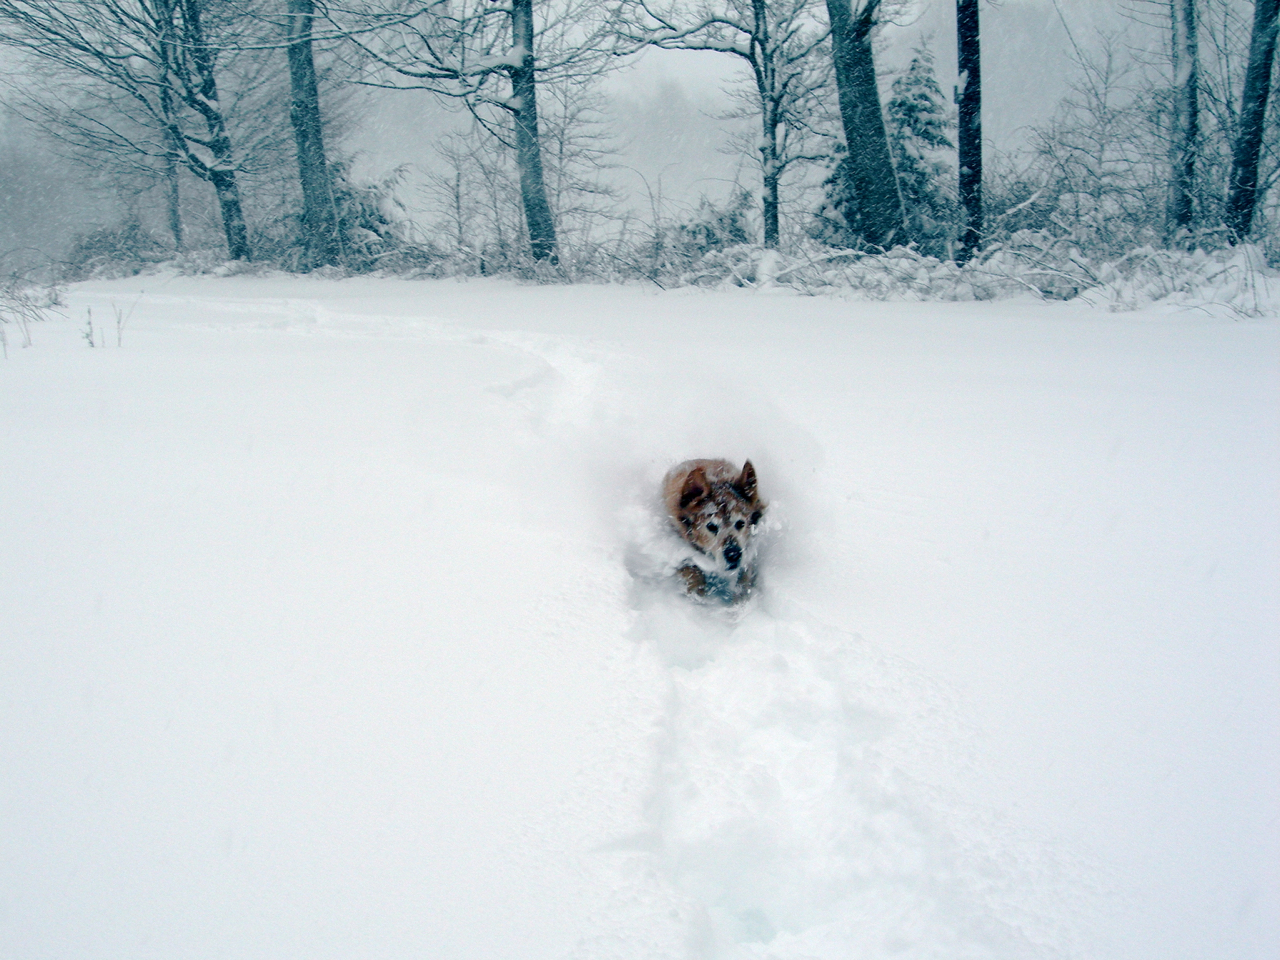 Burnie running though the snow